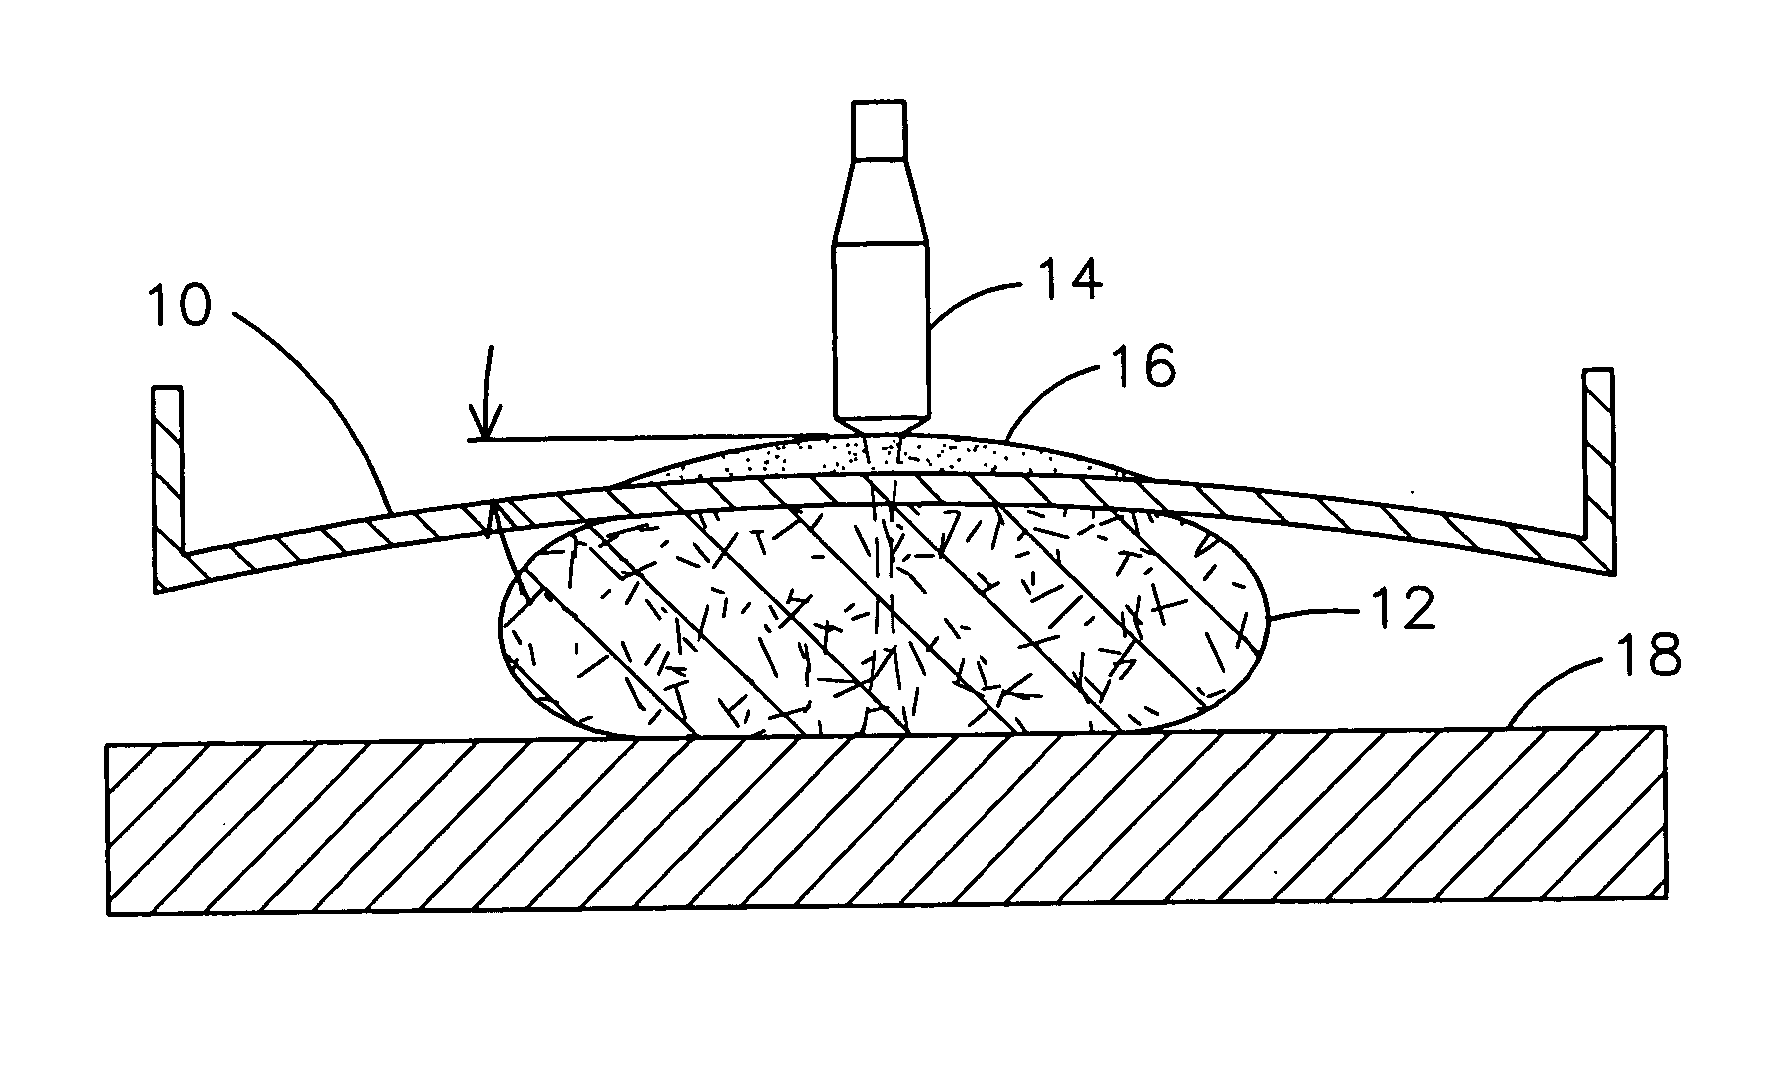 Compression paddle membrane and tensioning apparatus for compressing tissue for medical imaging purposes